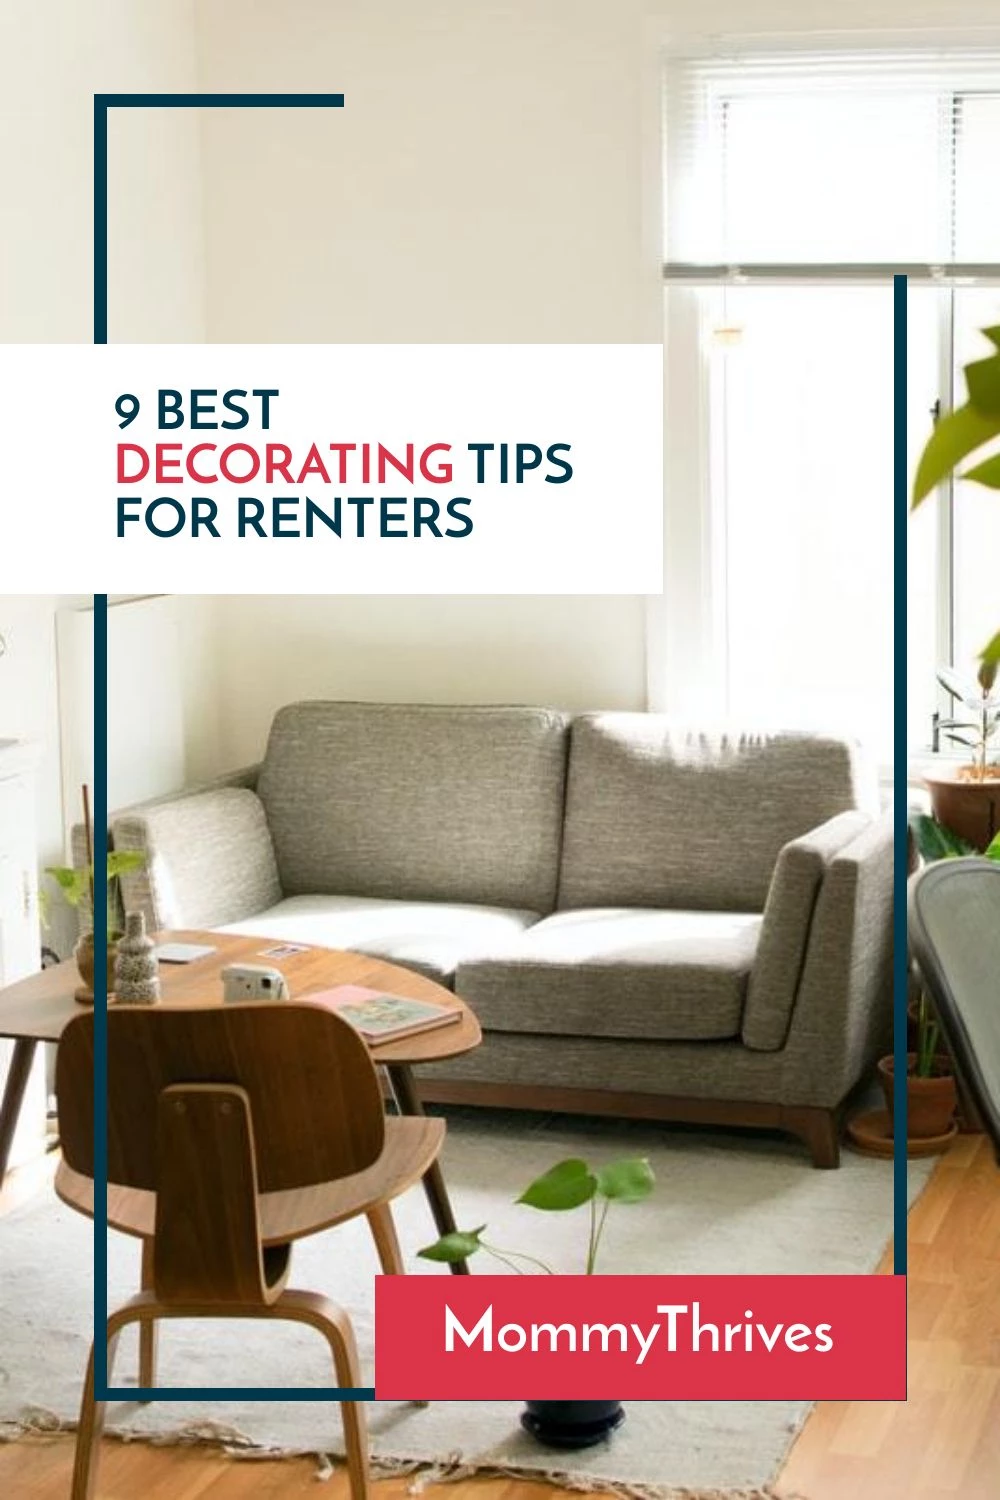 Tips for decorating a small apartment